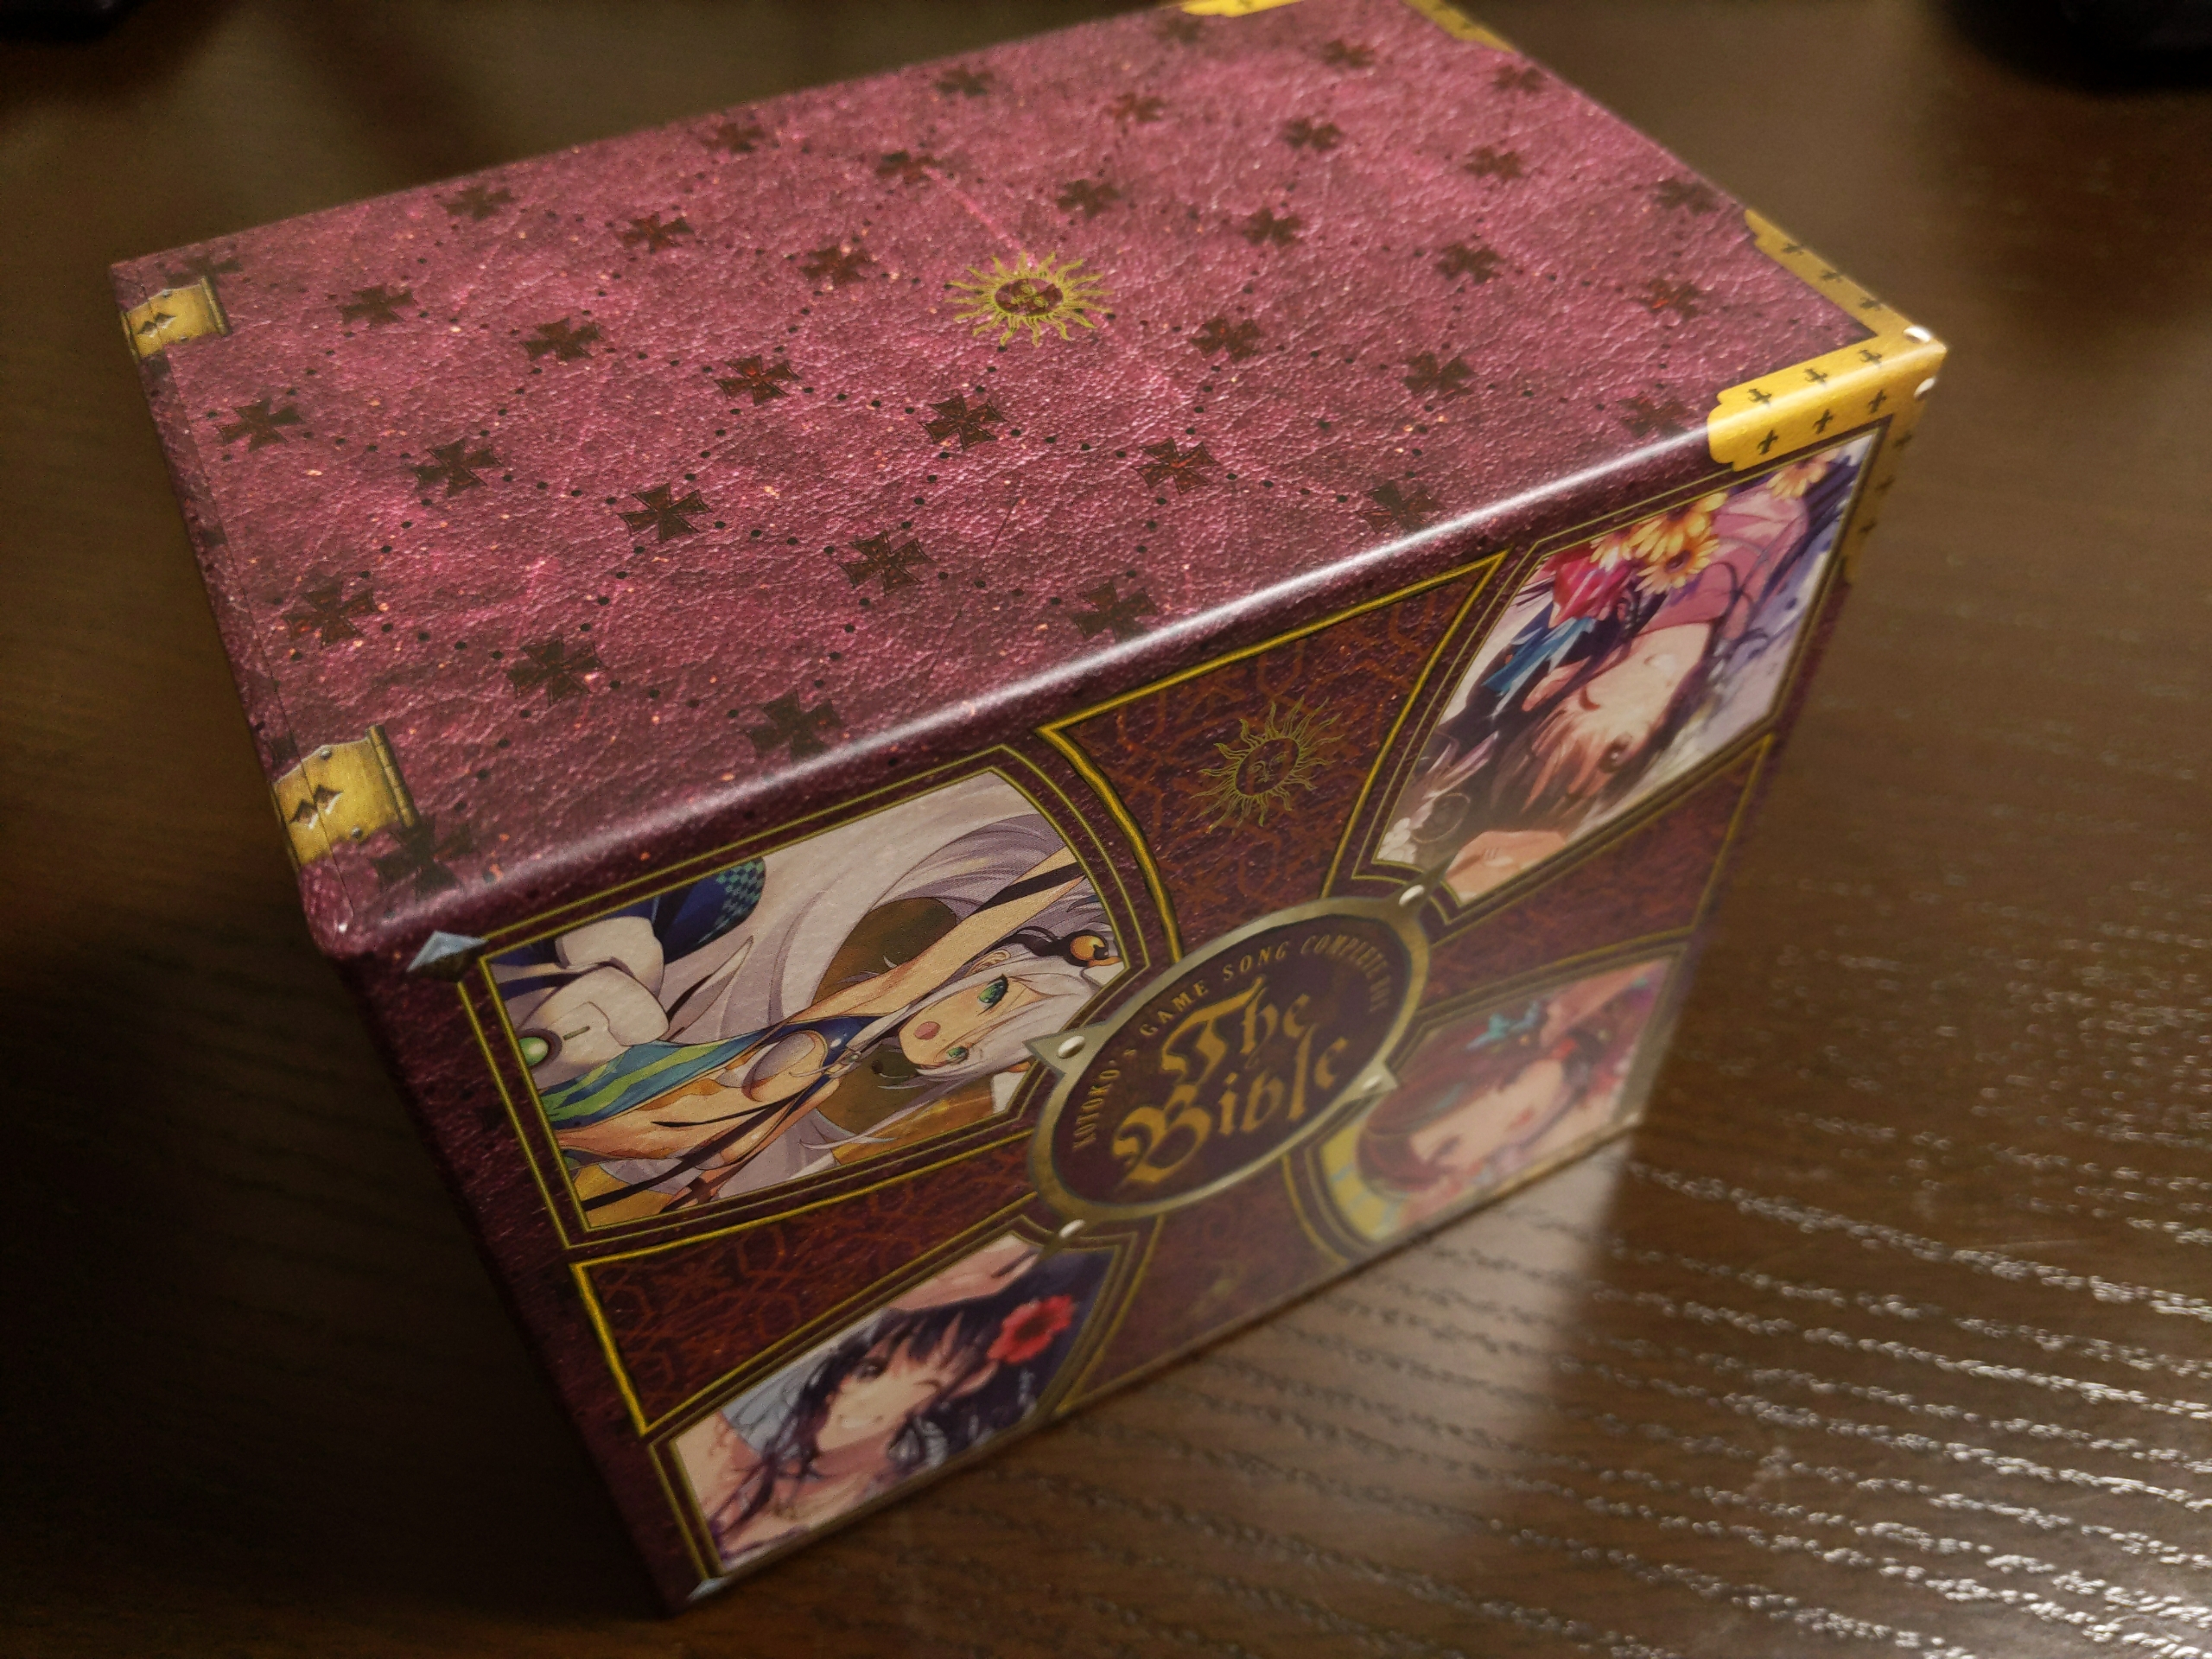 KOTOKO's GAME SONG COMPLETE BOX 「The Bible」が届きました 